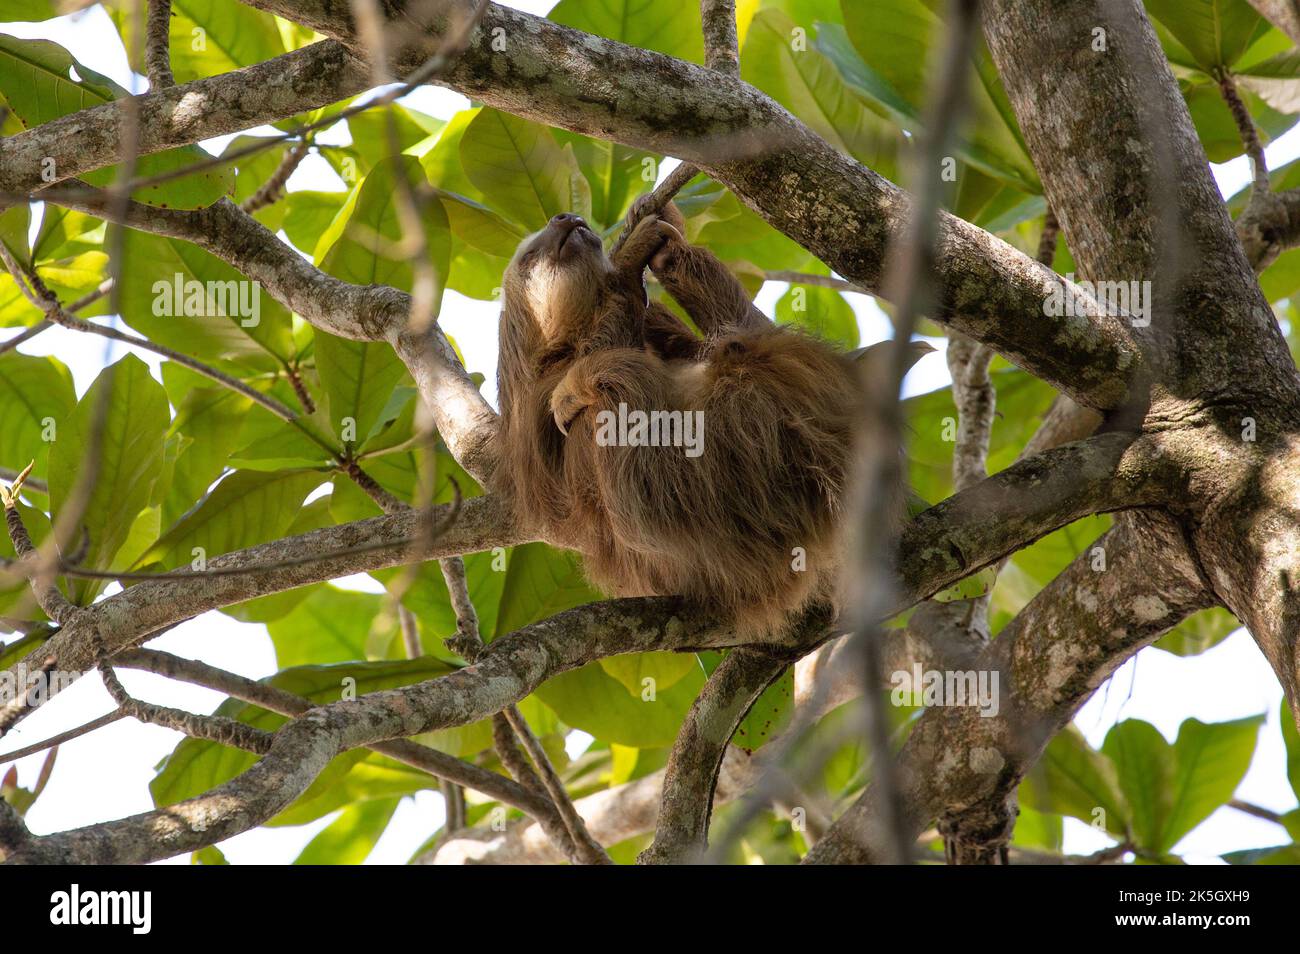 One cuddly three-toed sloth hangs from a branch in Cahuita National Park, Costa Rica. Stock Photo